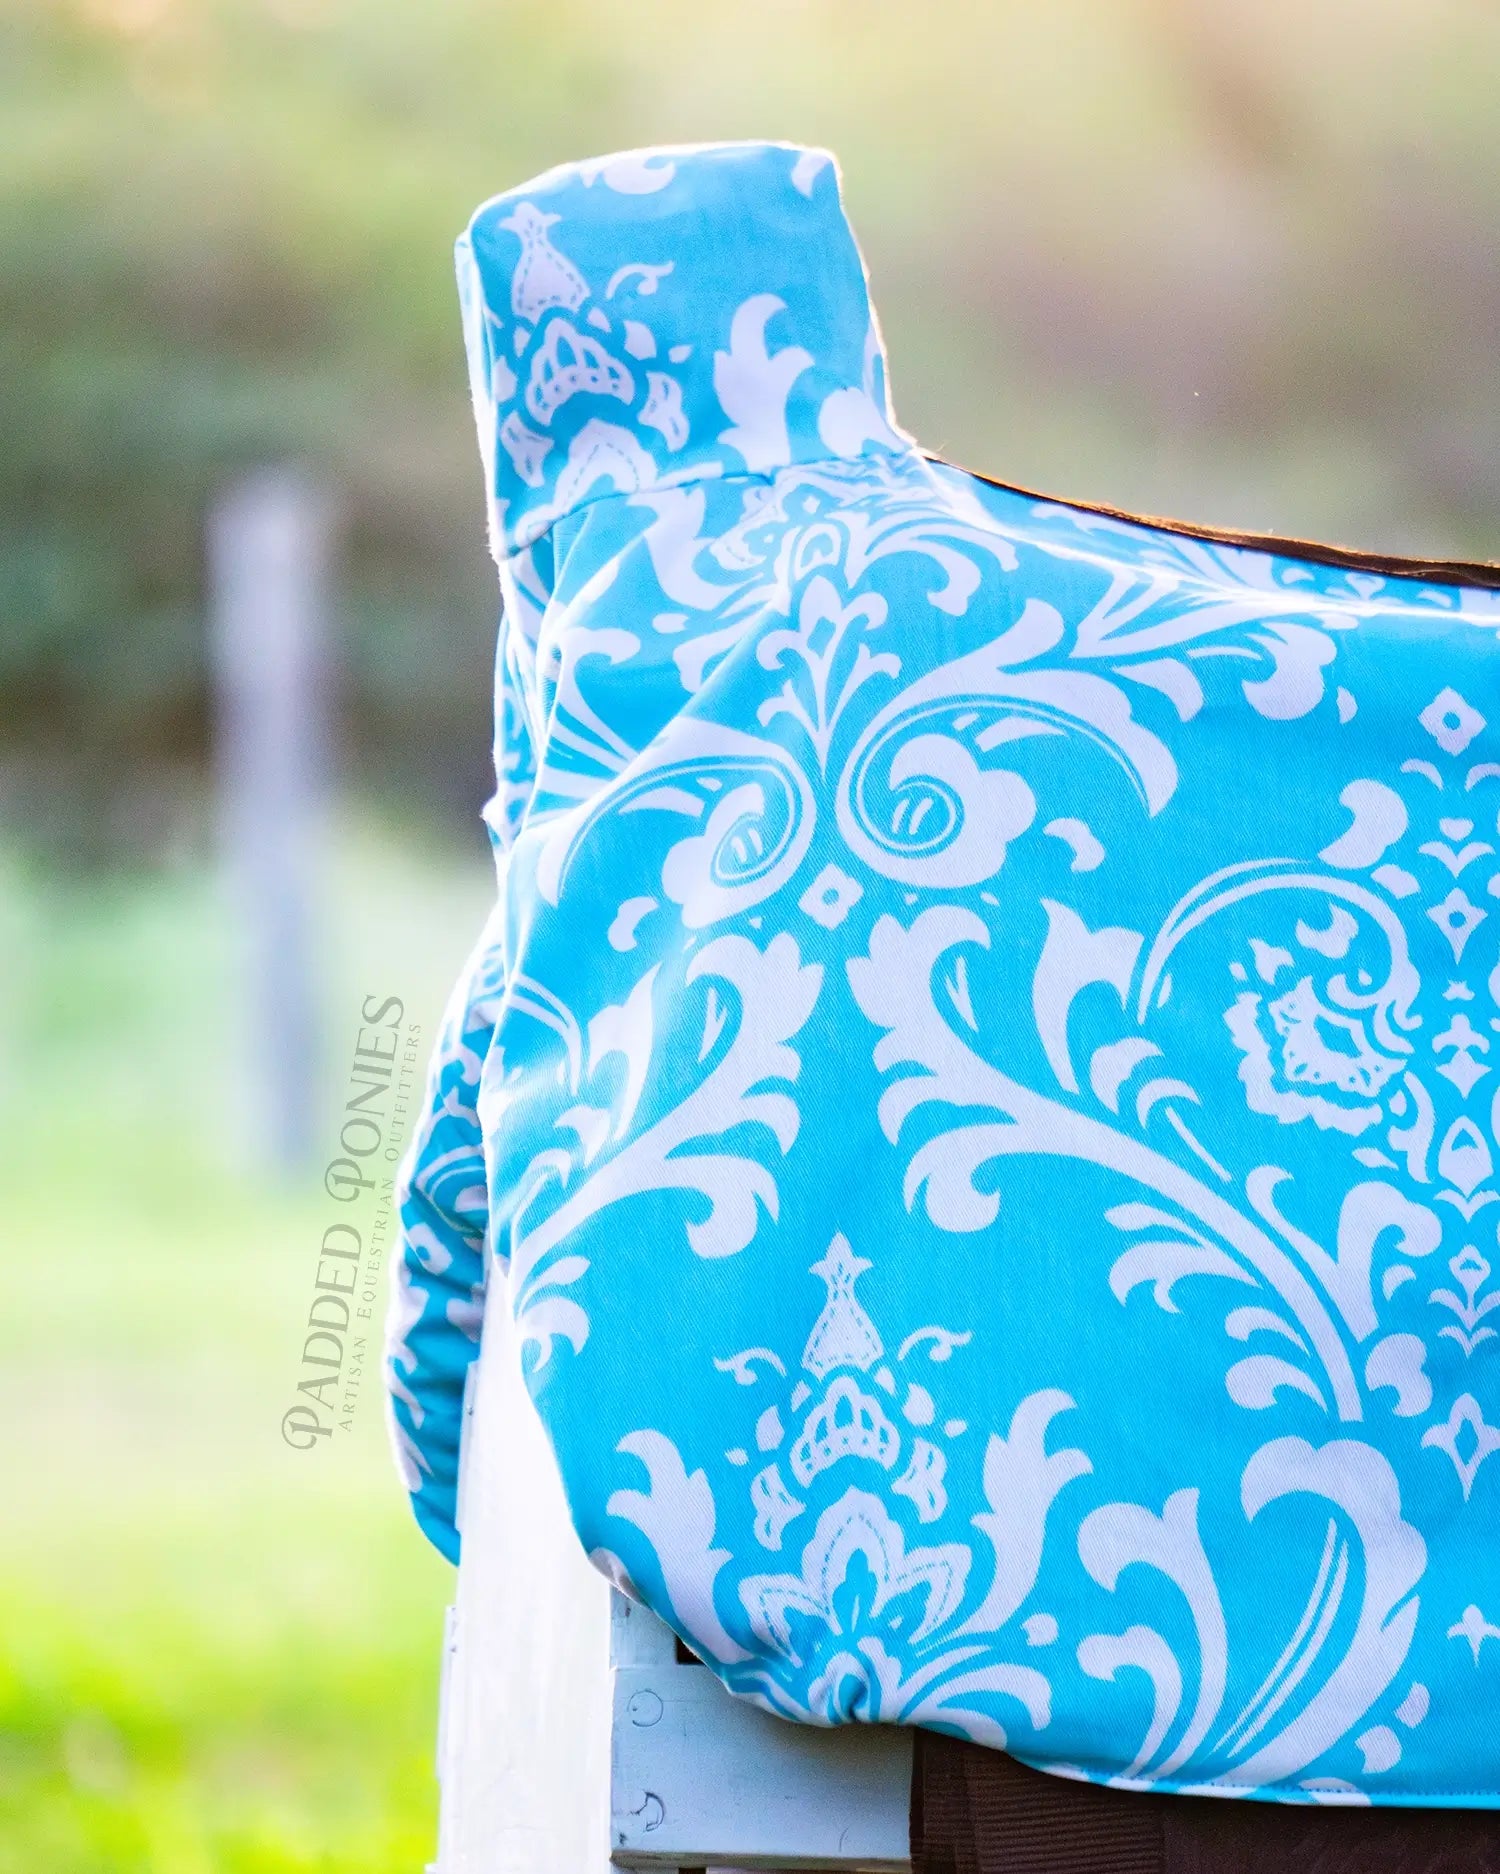 Aqua Teal Turquoise Floral Damask Western Saddle Cover with Monogram